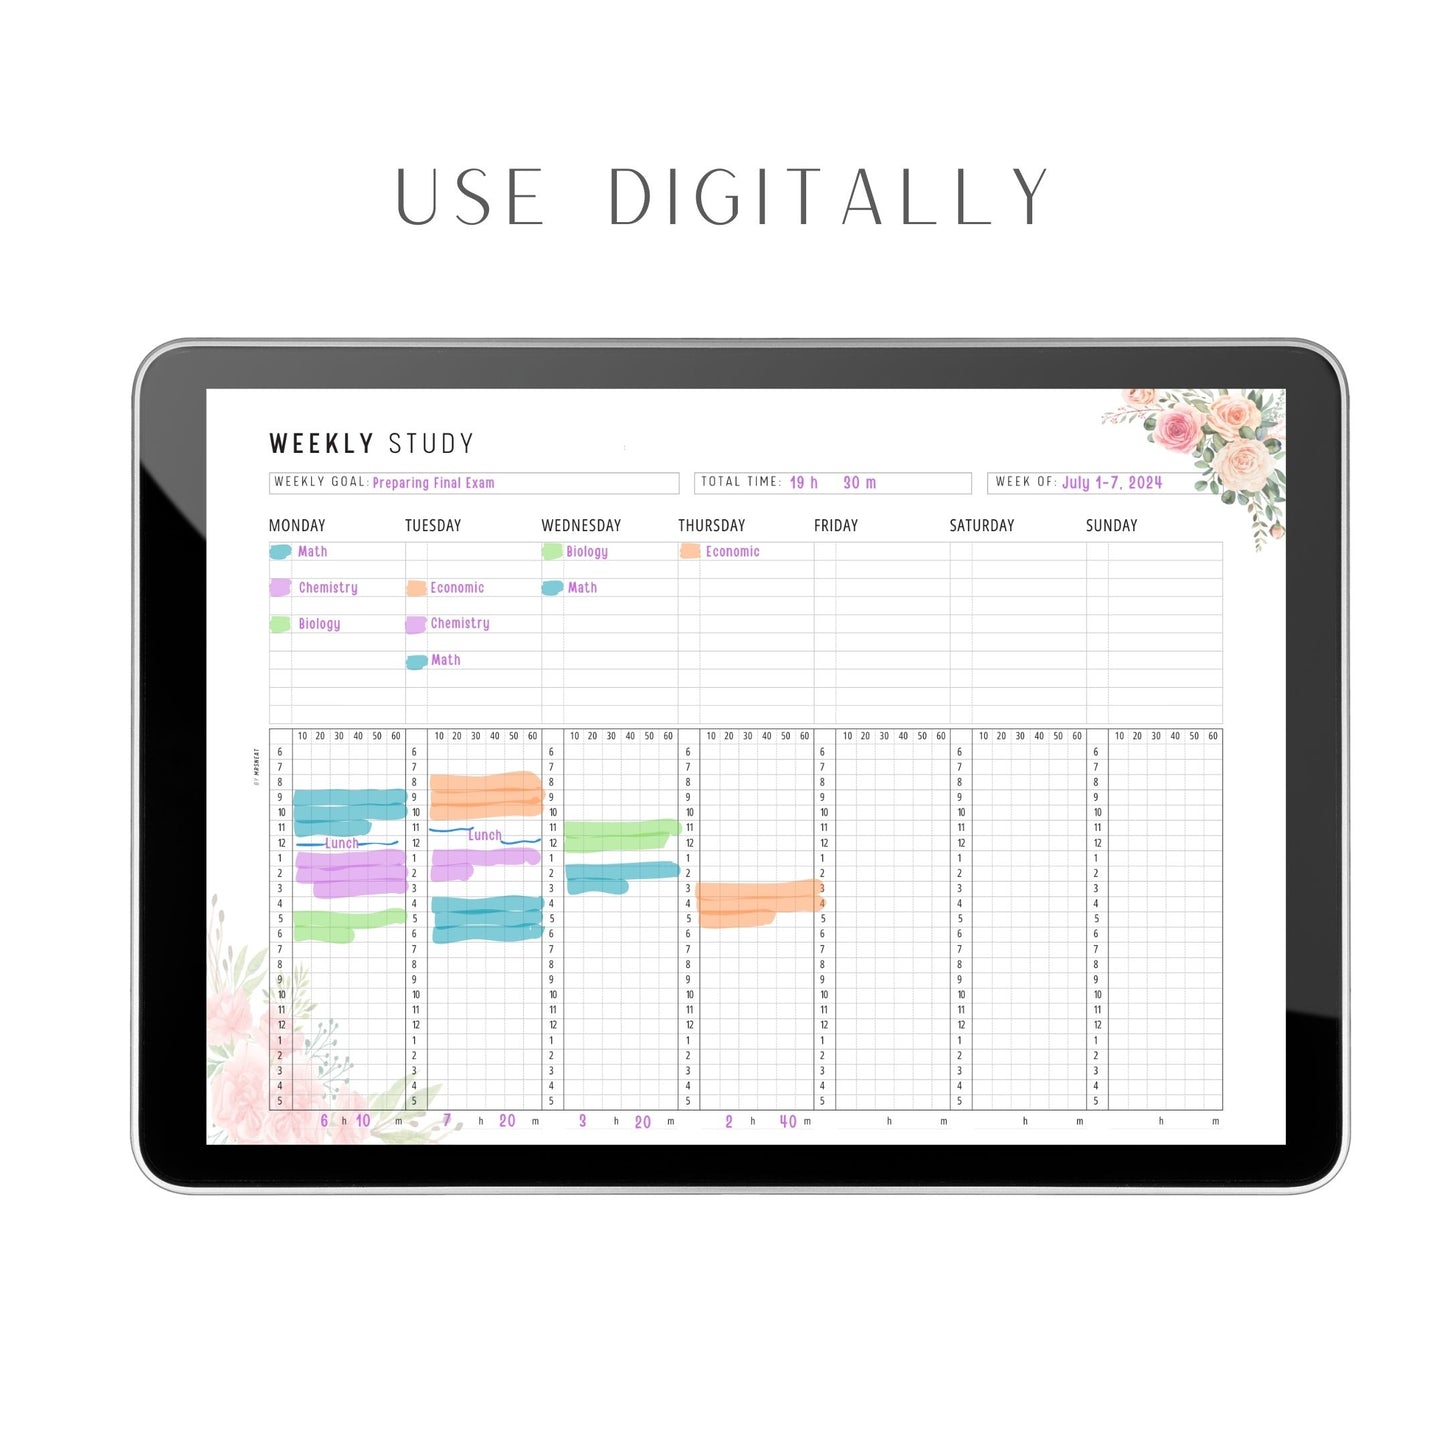 Floral Weekly Study Tracker Template